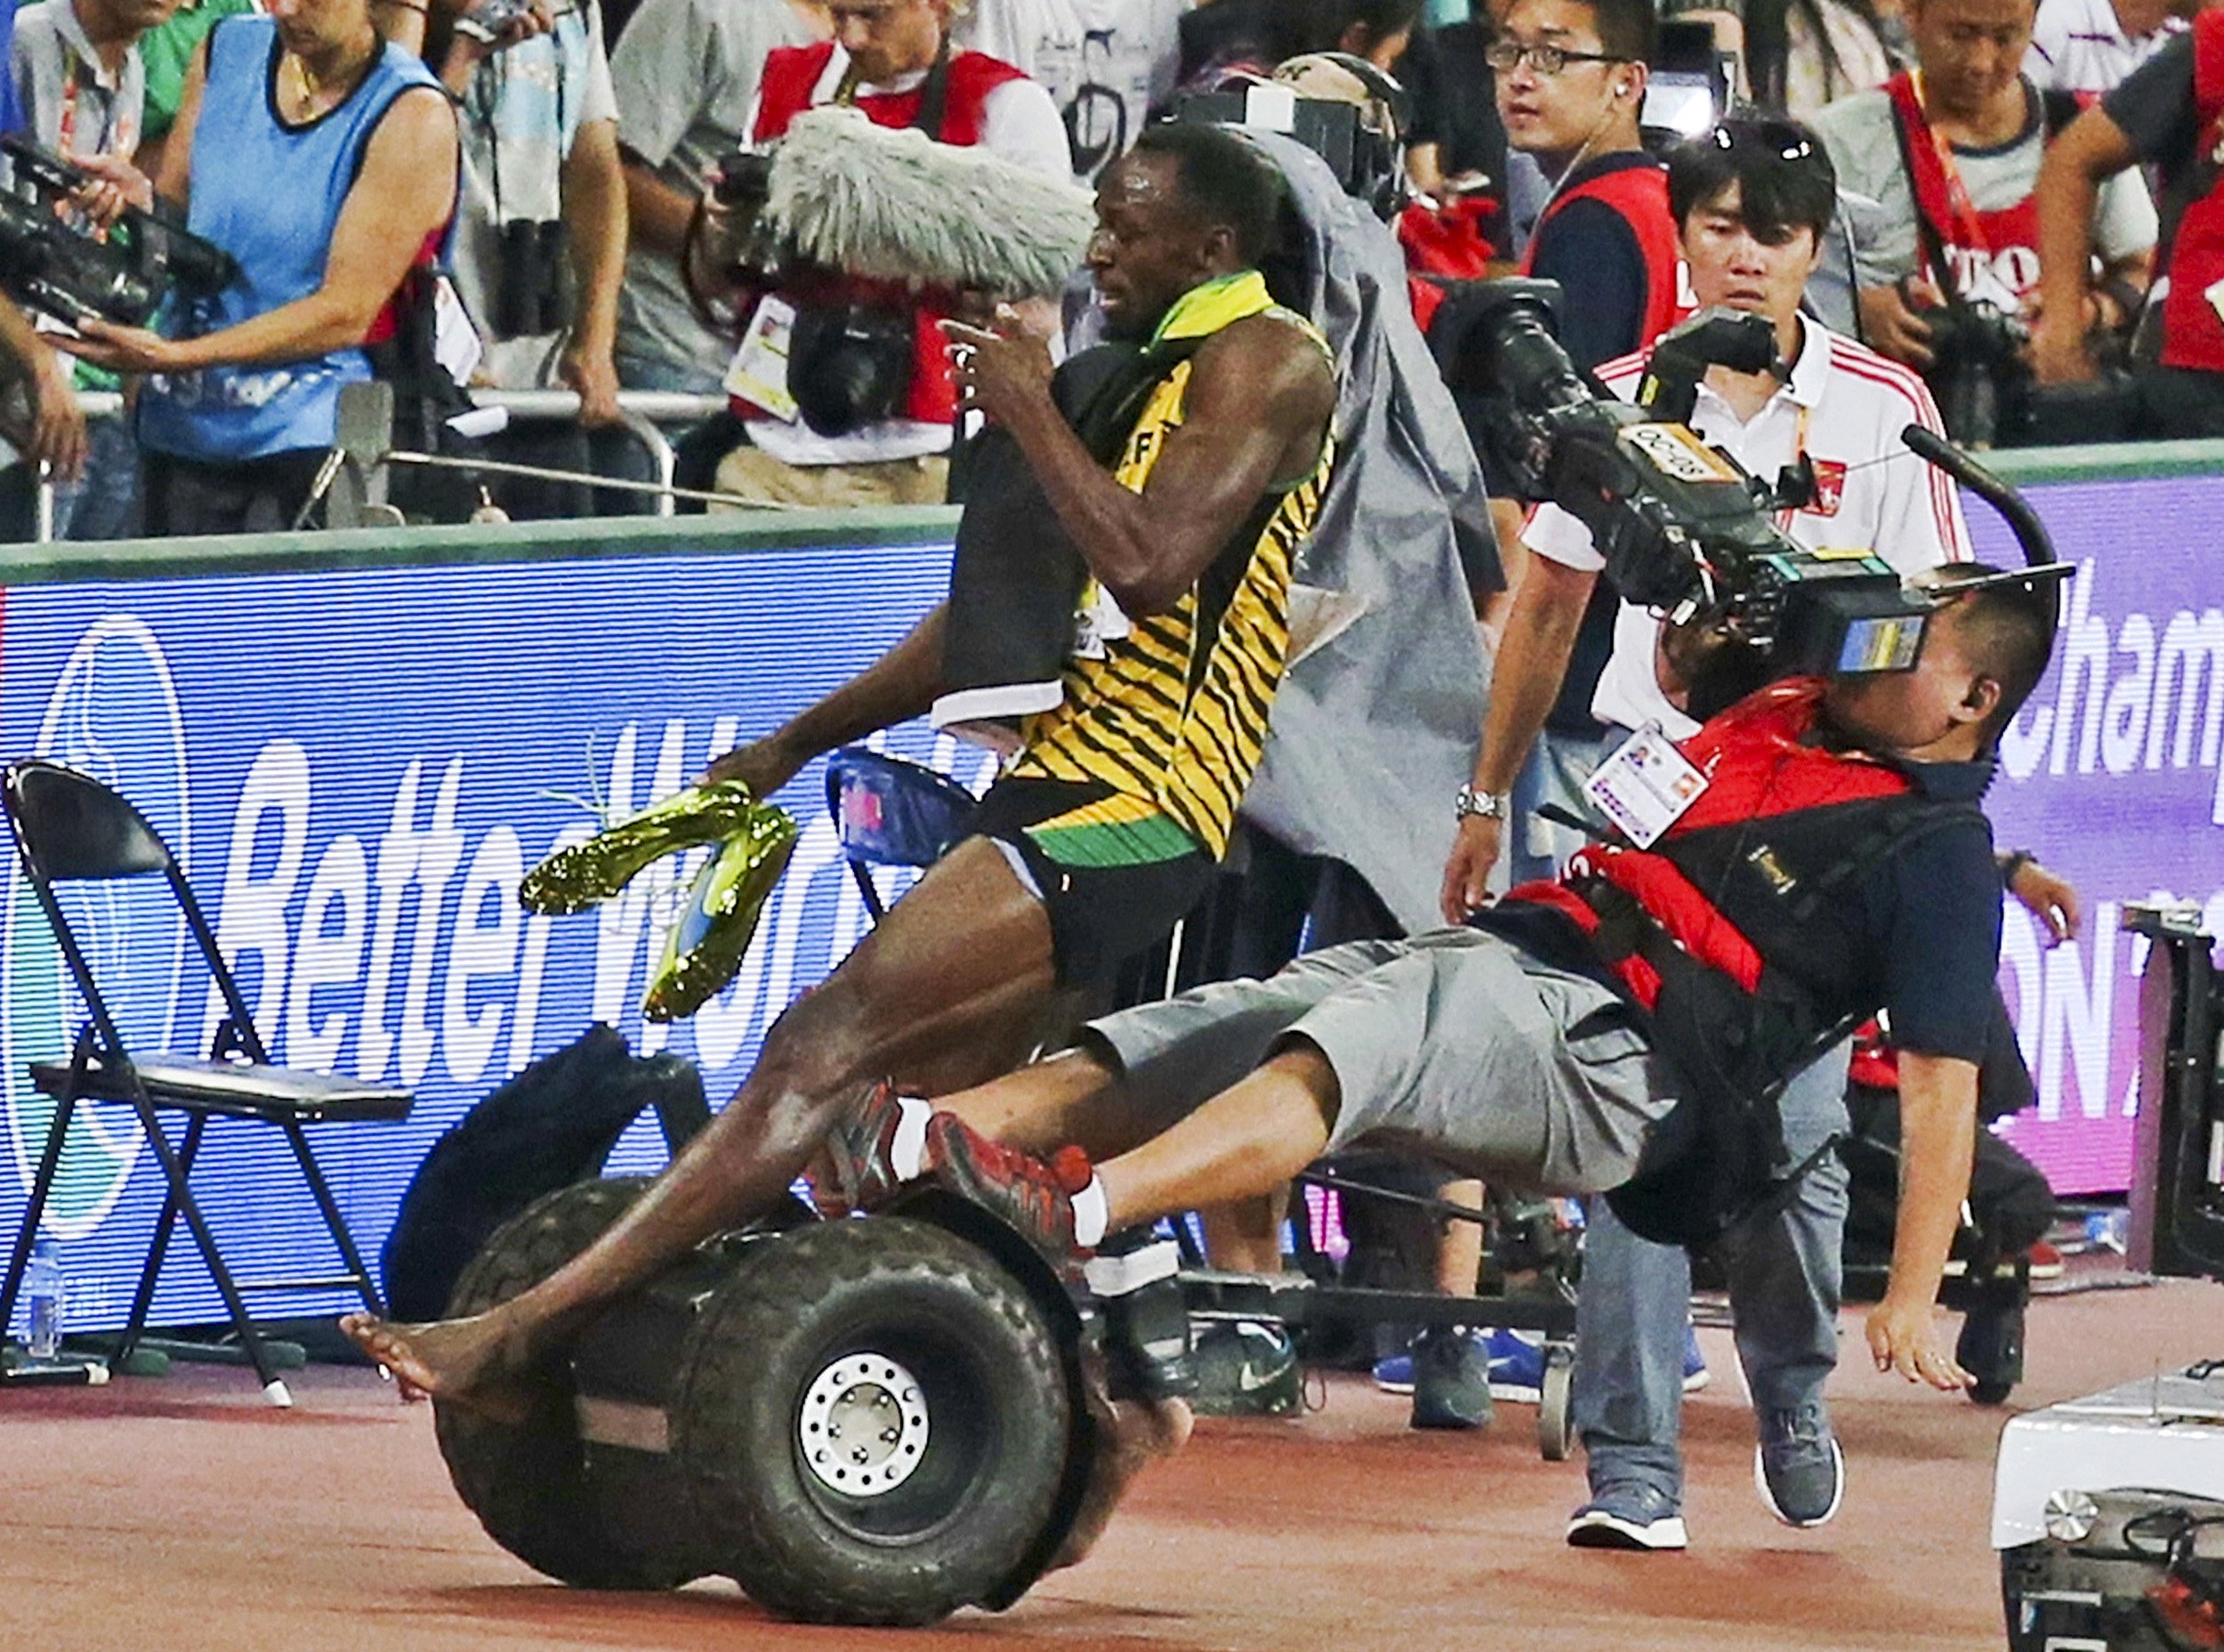 Usain Bolt escaped with minor cuts. Photo: Reuters
